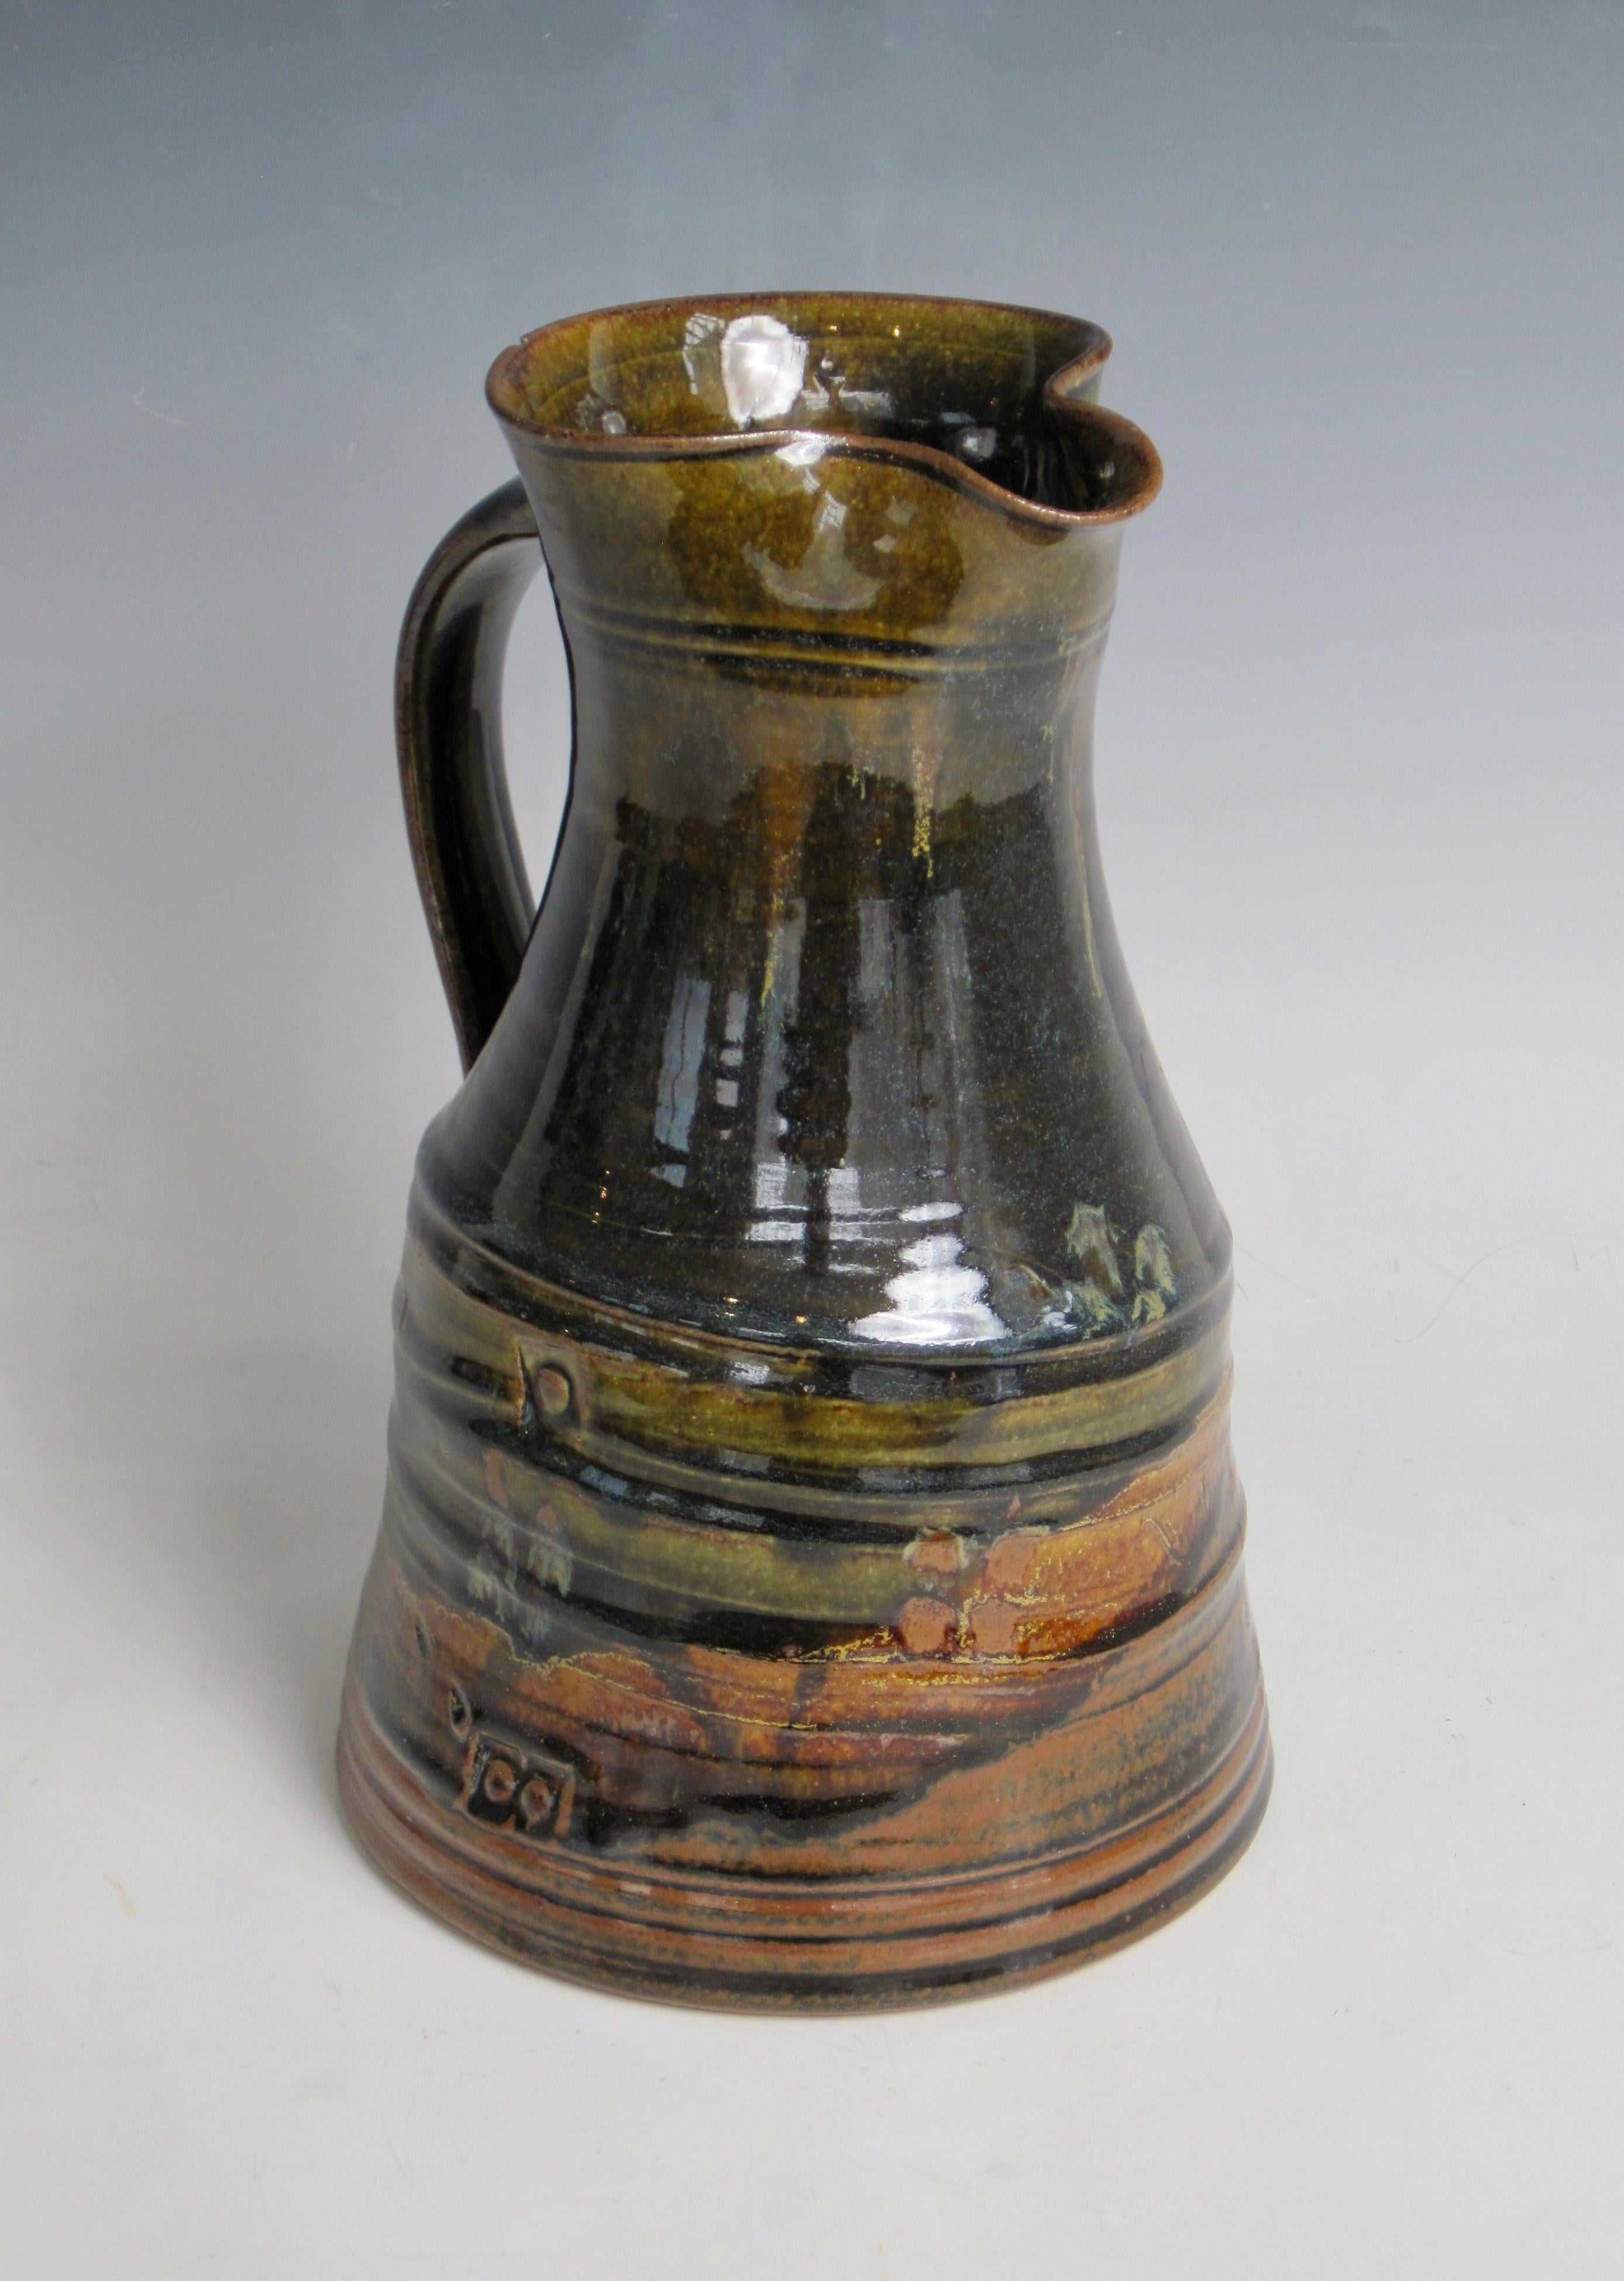 A traditional form pottery pitcher by John Glick in shades of brown, green and orange. Markings on sides and signed on underside.
John Glick is a people’s potter. In a career spanning over five decades, the ceramist has remained committed to the